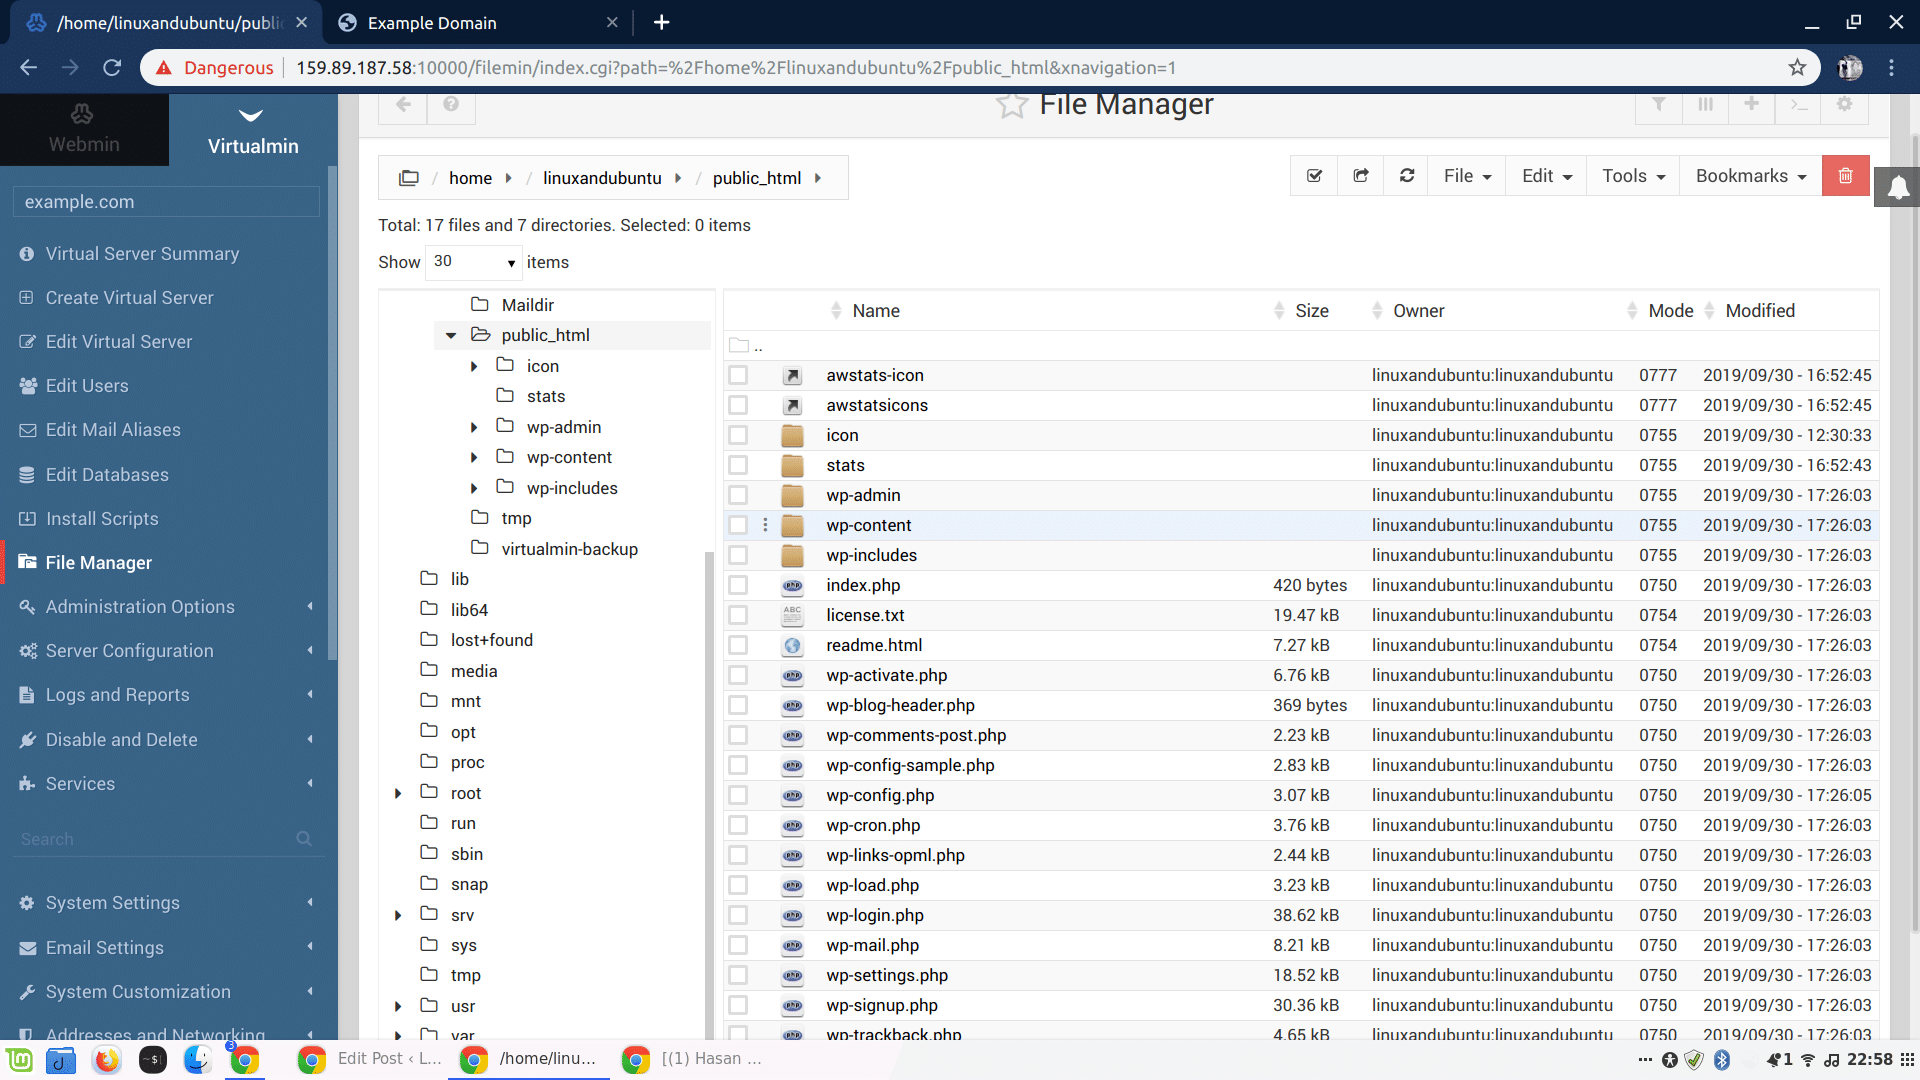 Virtualmin file manager